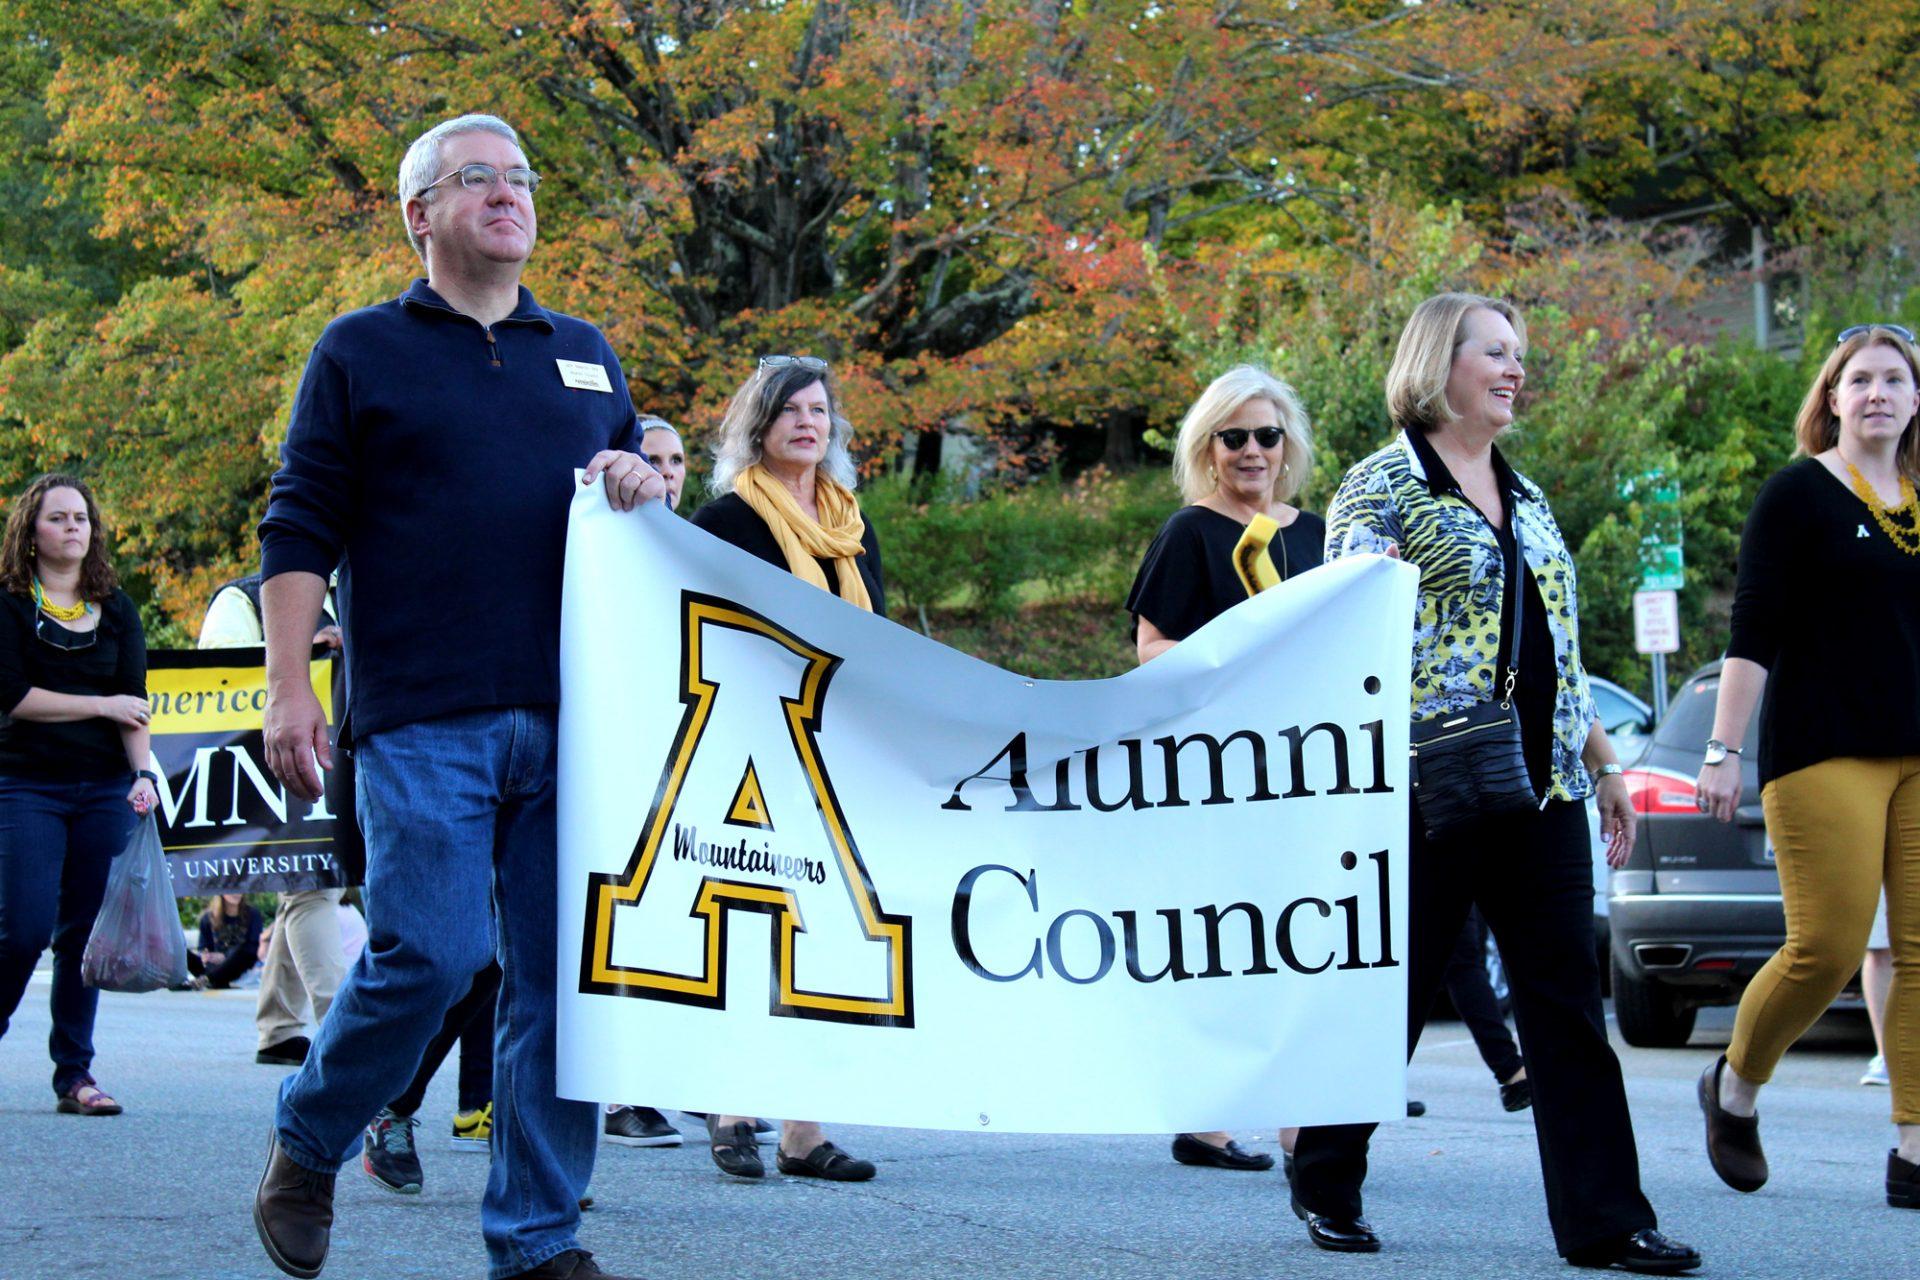 ASUs Alumni Council walking in the 2017 homecoming parade on Friday in downtown Boone.